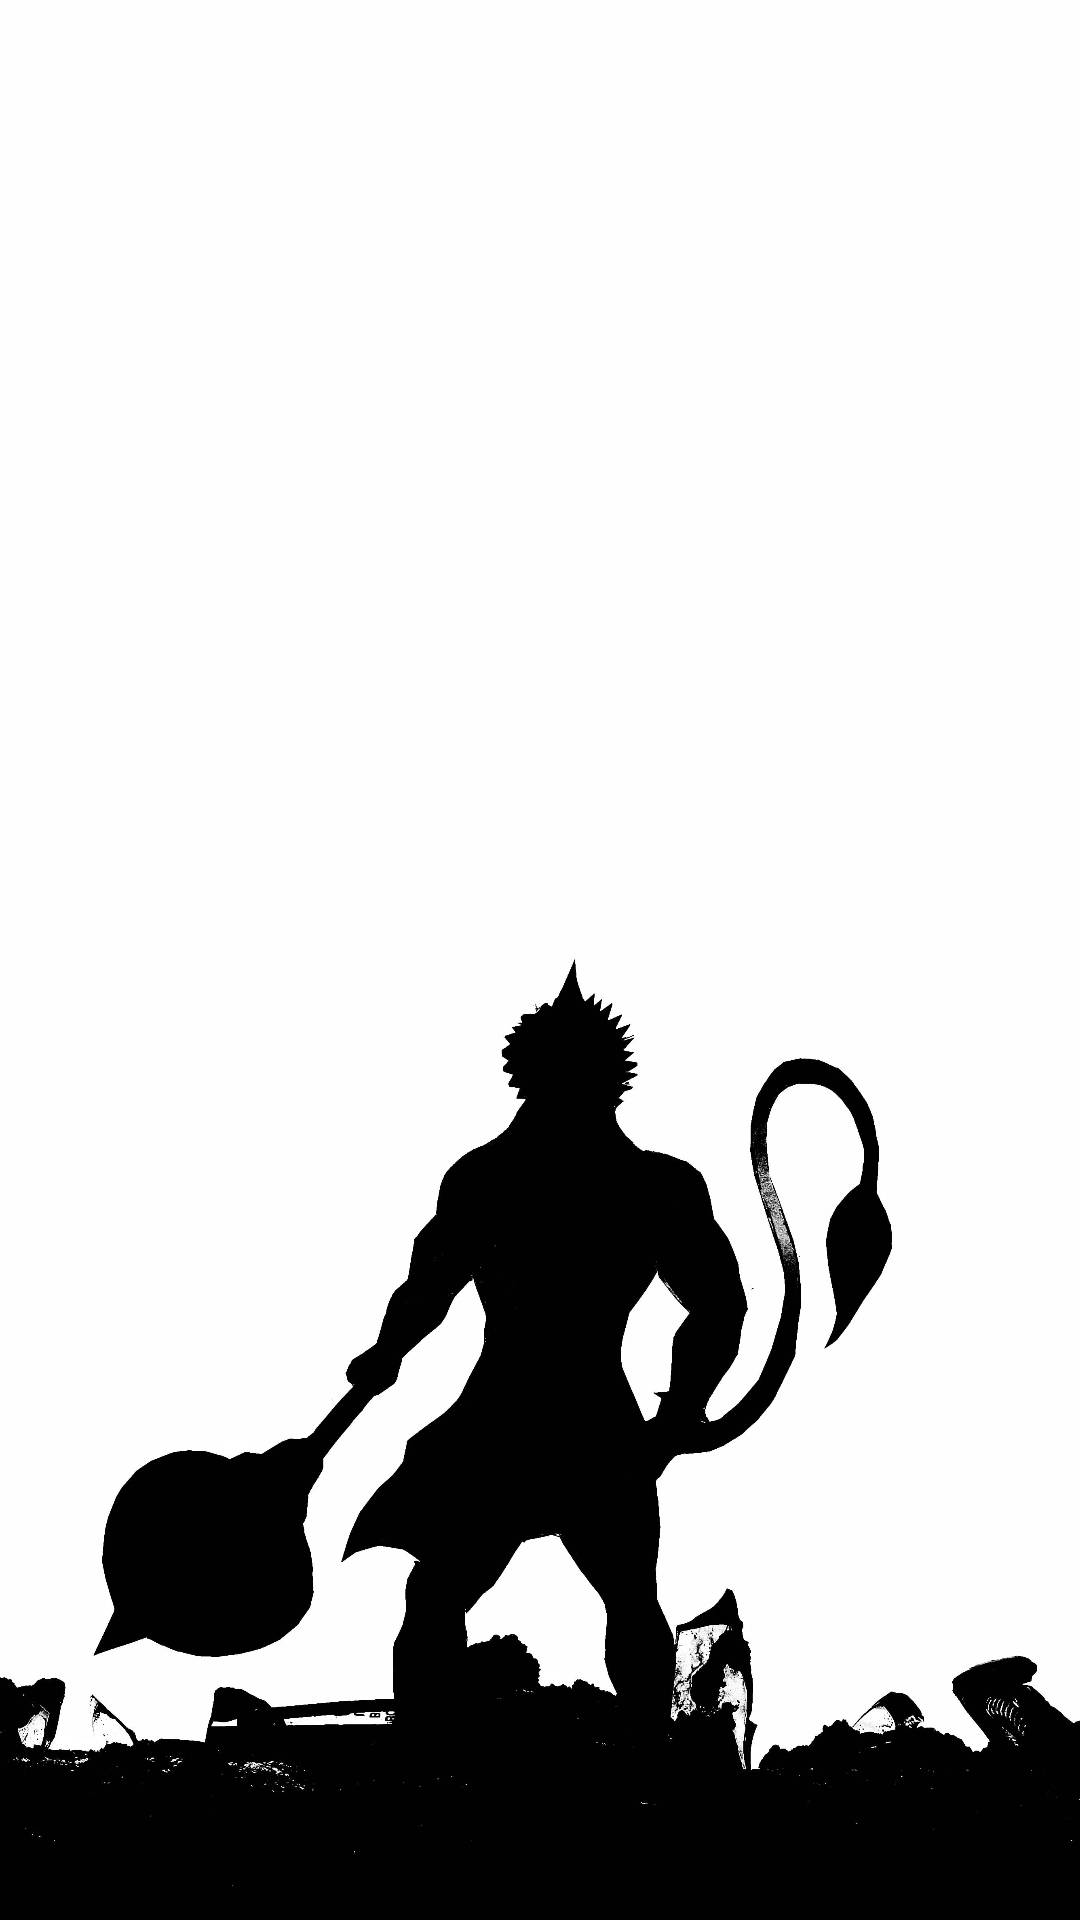 500 Lord Hanuman Black And White Hd Wallpapers  Background Beautiful Best  Available For Download Lord Hanuman Black And White Hd Images Free On  Zicxacomphotos  Zicxa Photos